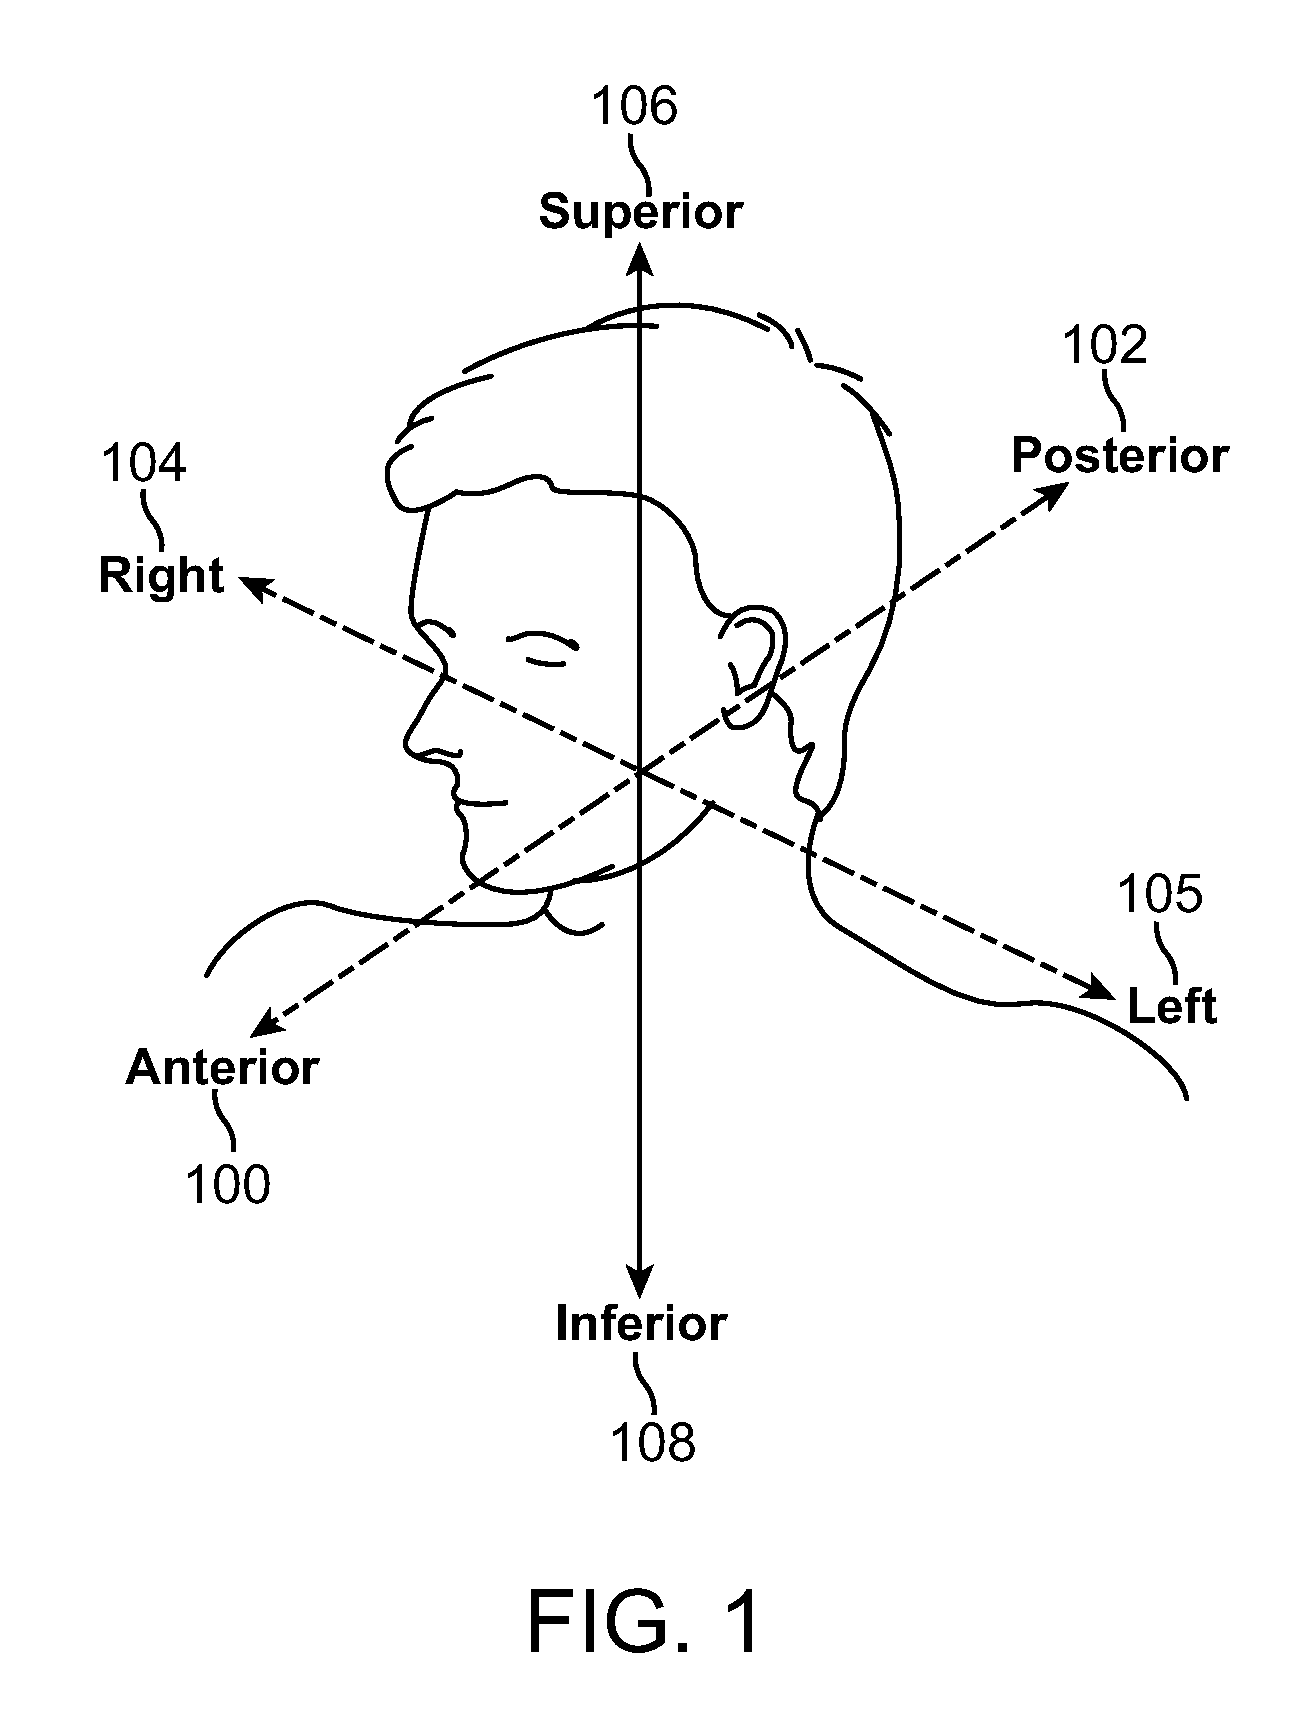 Delivery tools for sleep disorders treatment implant and methods of implantation